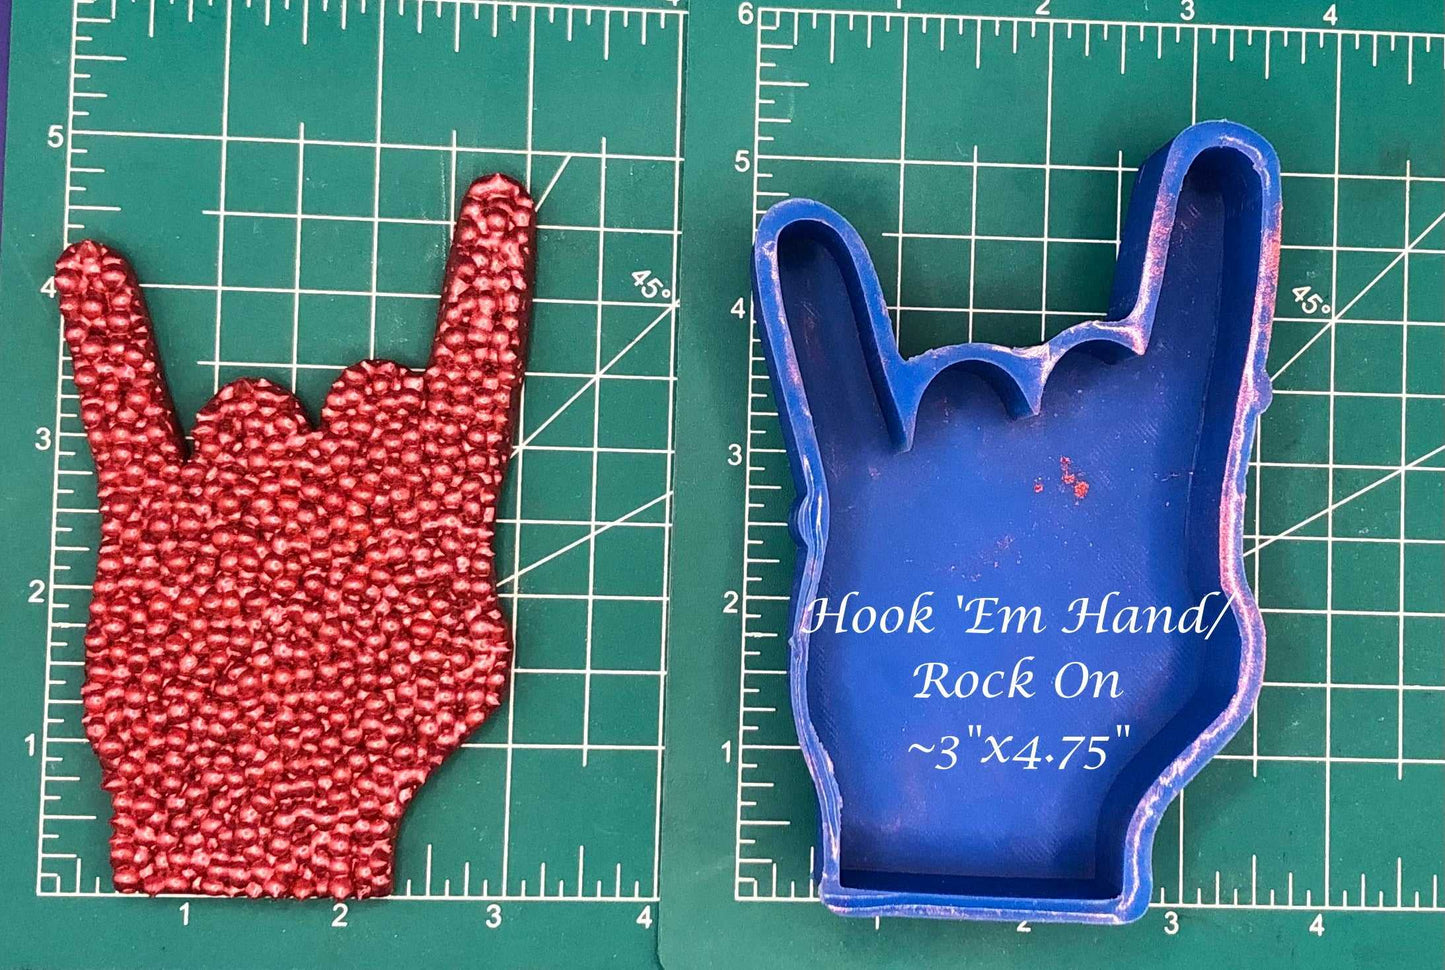 Rock On, Hook'em Hand -Silicone freshie mold - Silicone Mold